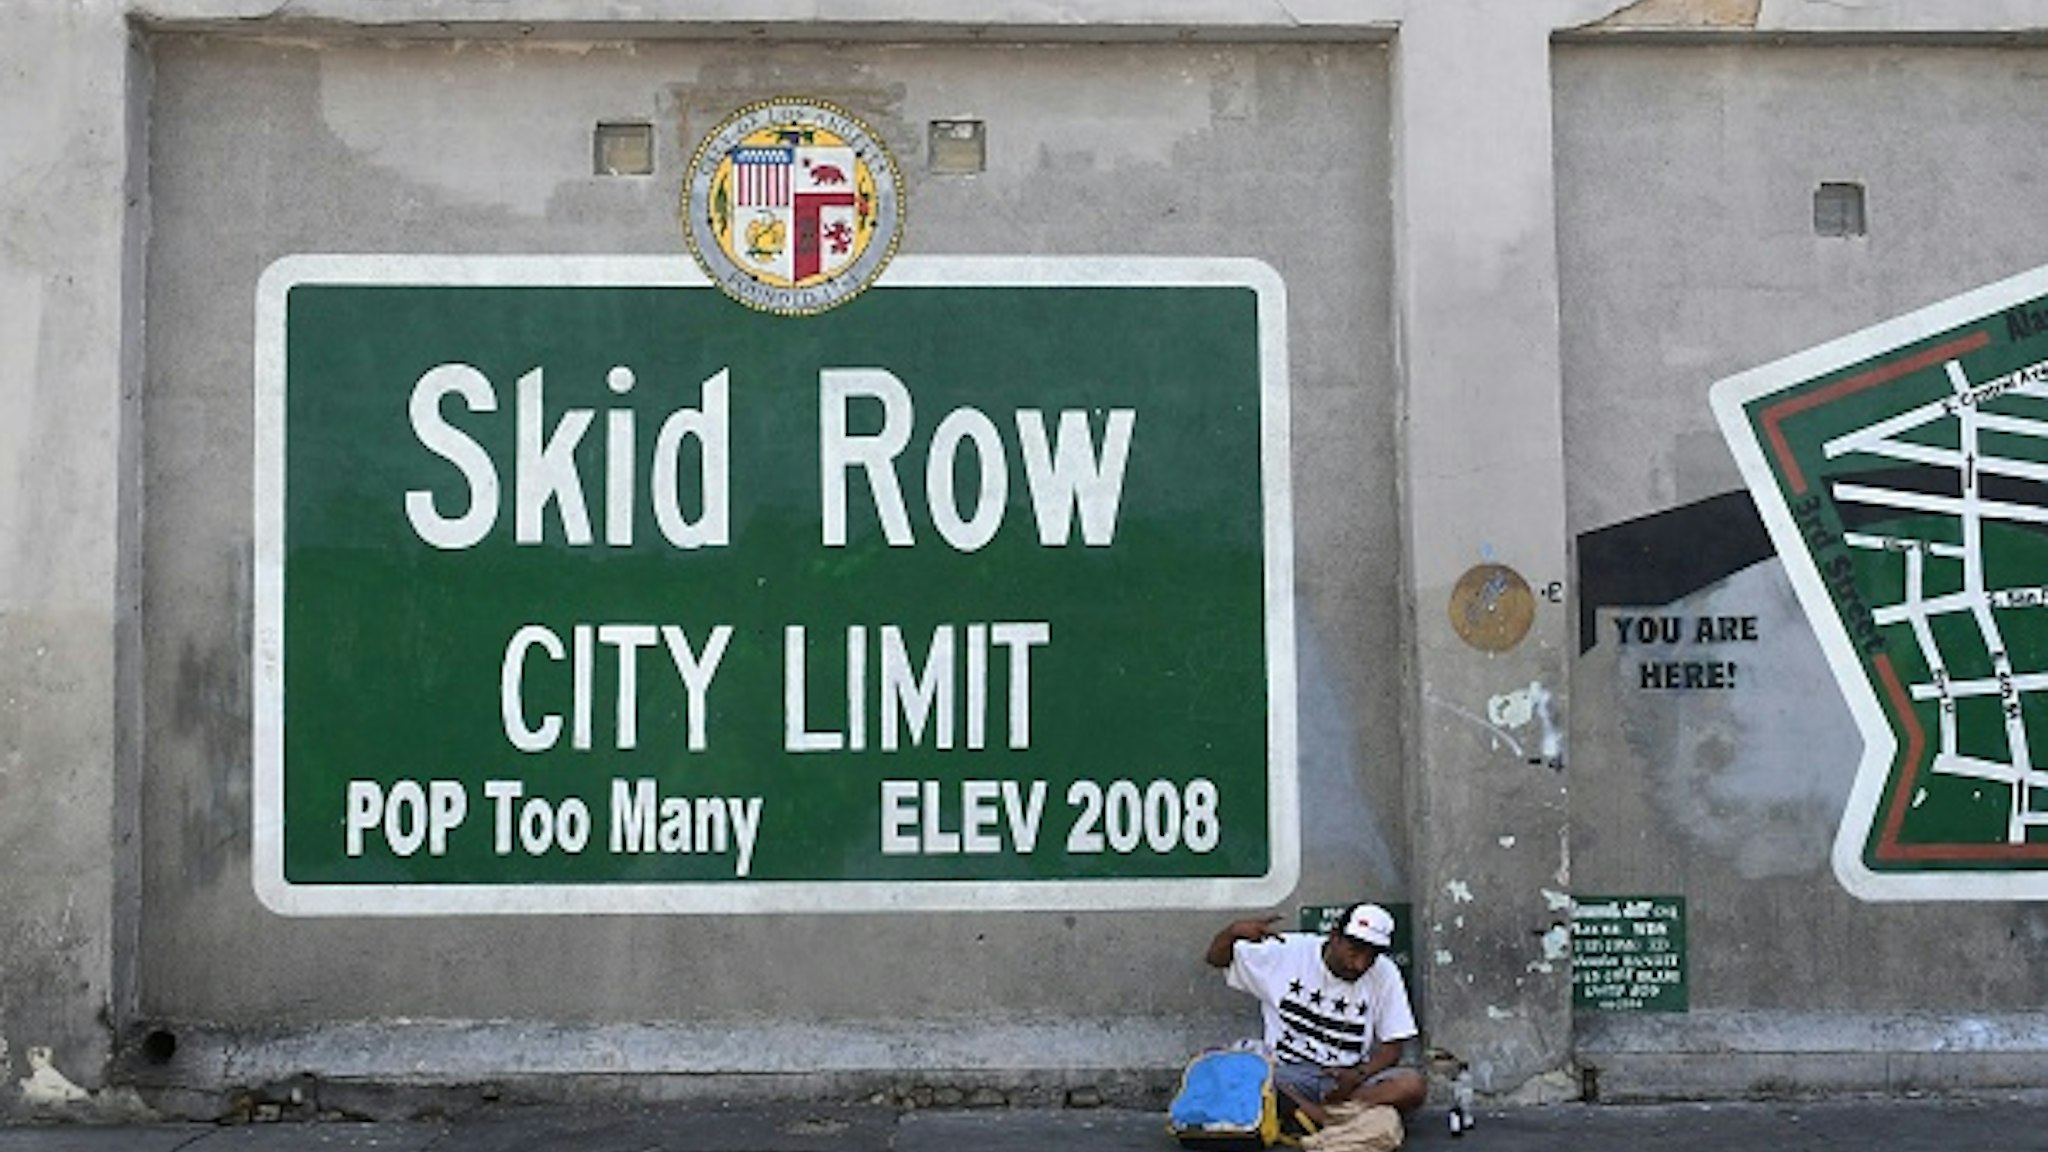 TOPSHOT - A man gestures while seated beside a Skid Row painting on a sidewalk in downtown Los Angeles on May 30, 2019. - The city of Los Angeles on May 29 agreed to allow homeless people on Skid Row to keep their property and not have it seized, providing the items are not bulky or hazardous.